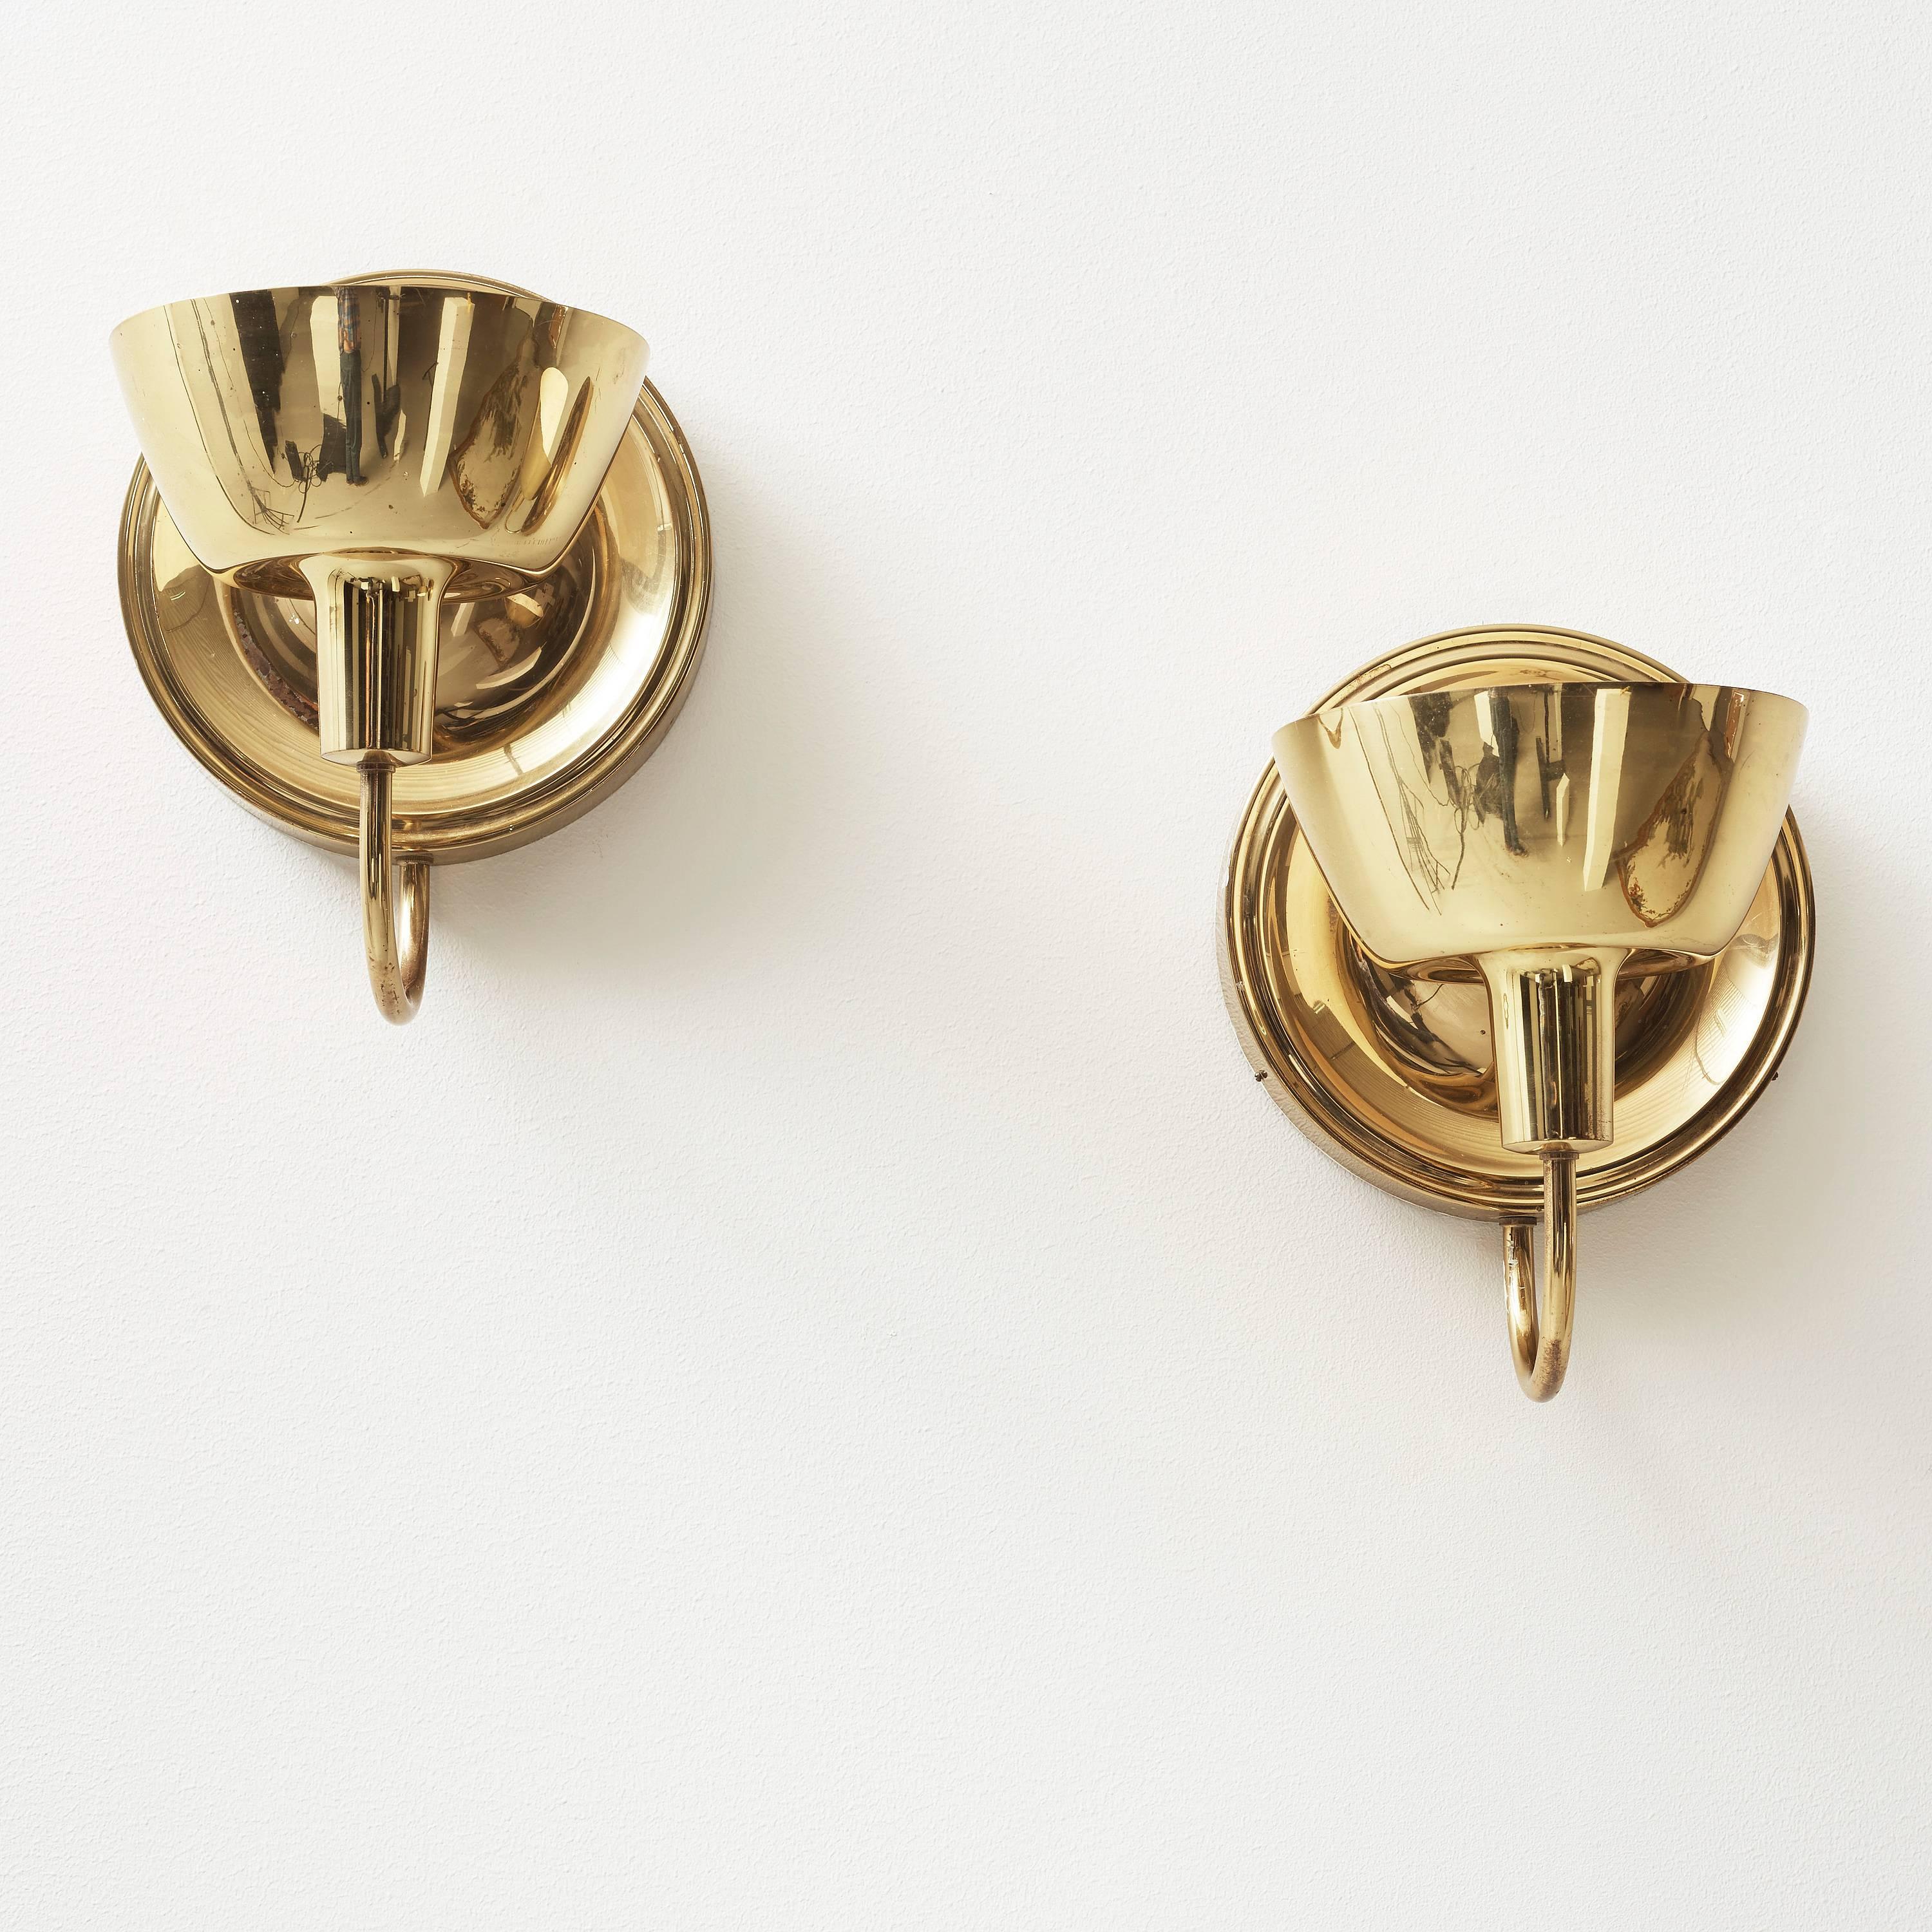 A pair of large wall lights designed by Josef Frank for Firma Svenskt Tenn, model 2389.
Polished brass. Single, Edison style socket.
Existing wiring, rewiring available upon request.
 Designed by Josef Frank in the late 1920s for his own company